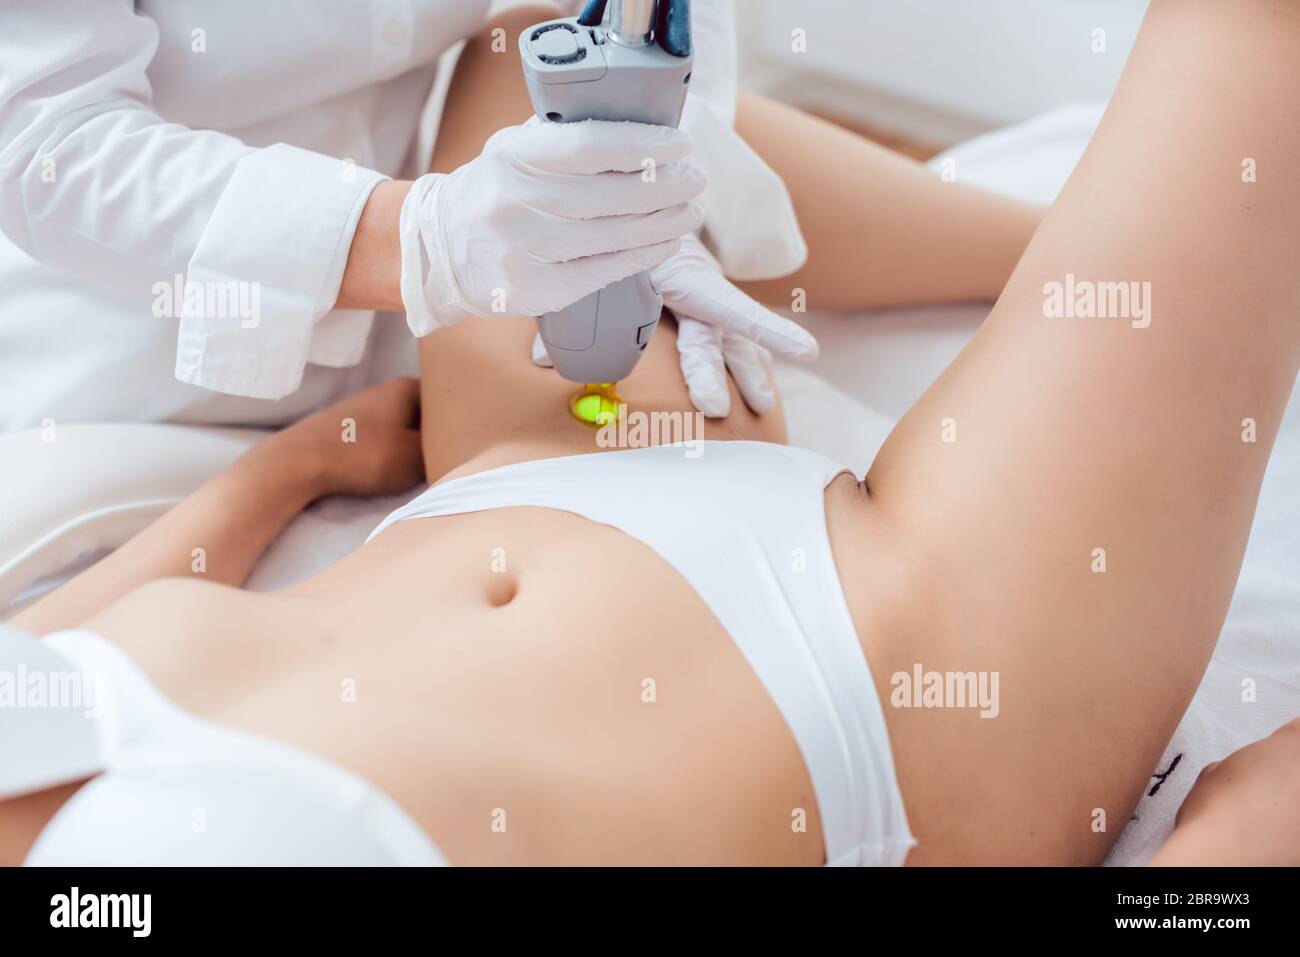 Hair removal in bikini zone using a laser device on young woman in cosmetic treatment Stock Photo